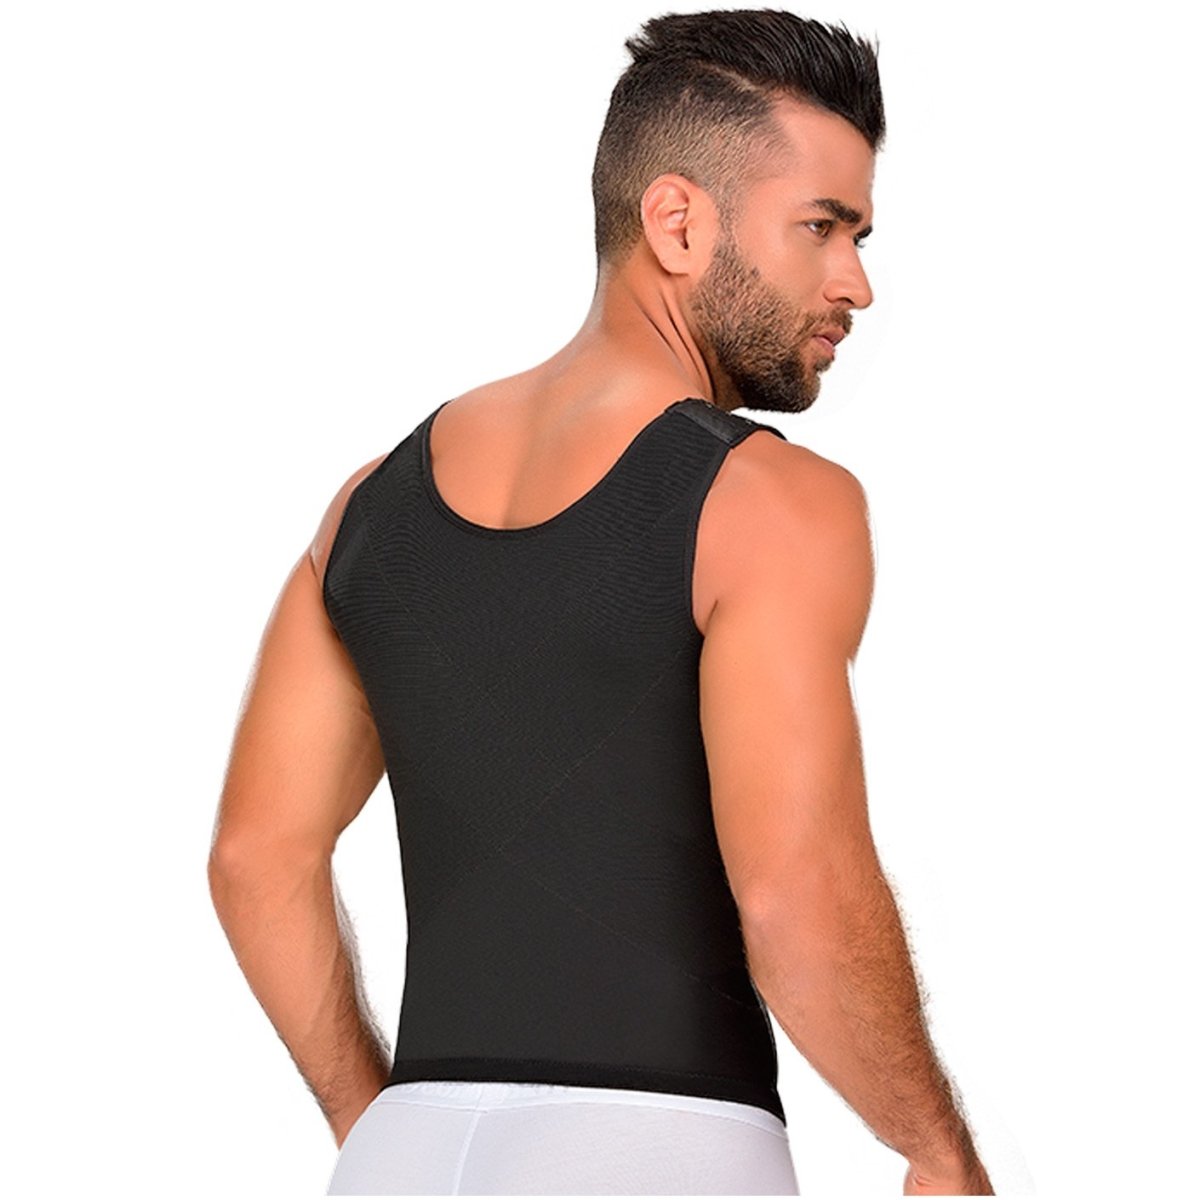 M&D 0760N Compression Shaper Shirts for Men / Powernet - Colombian Body Shaper